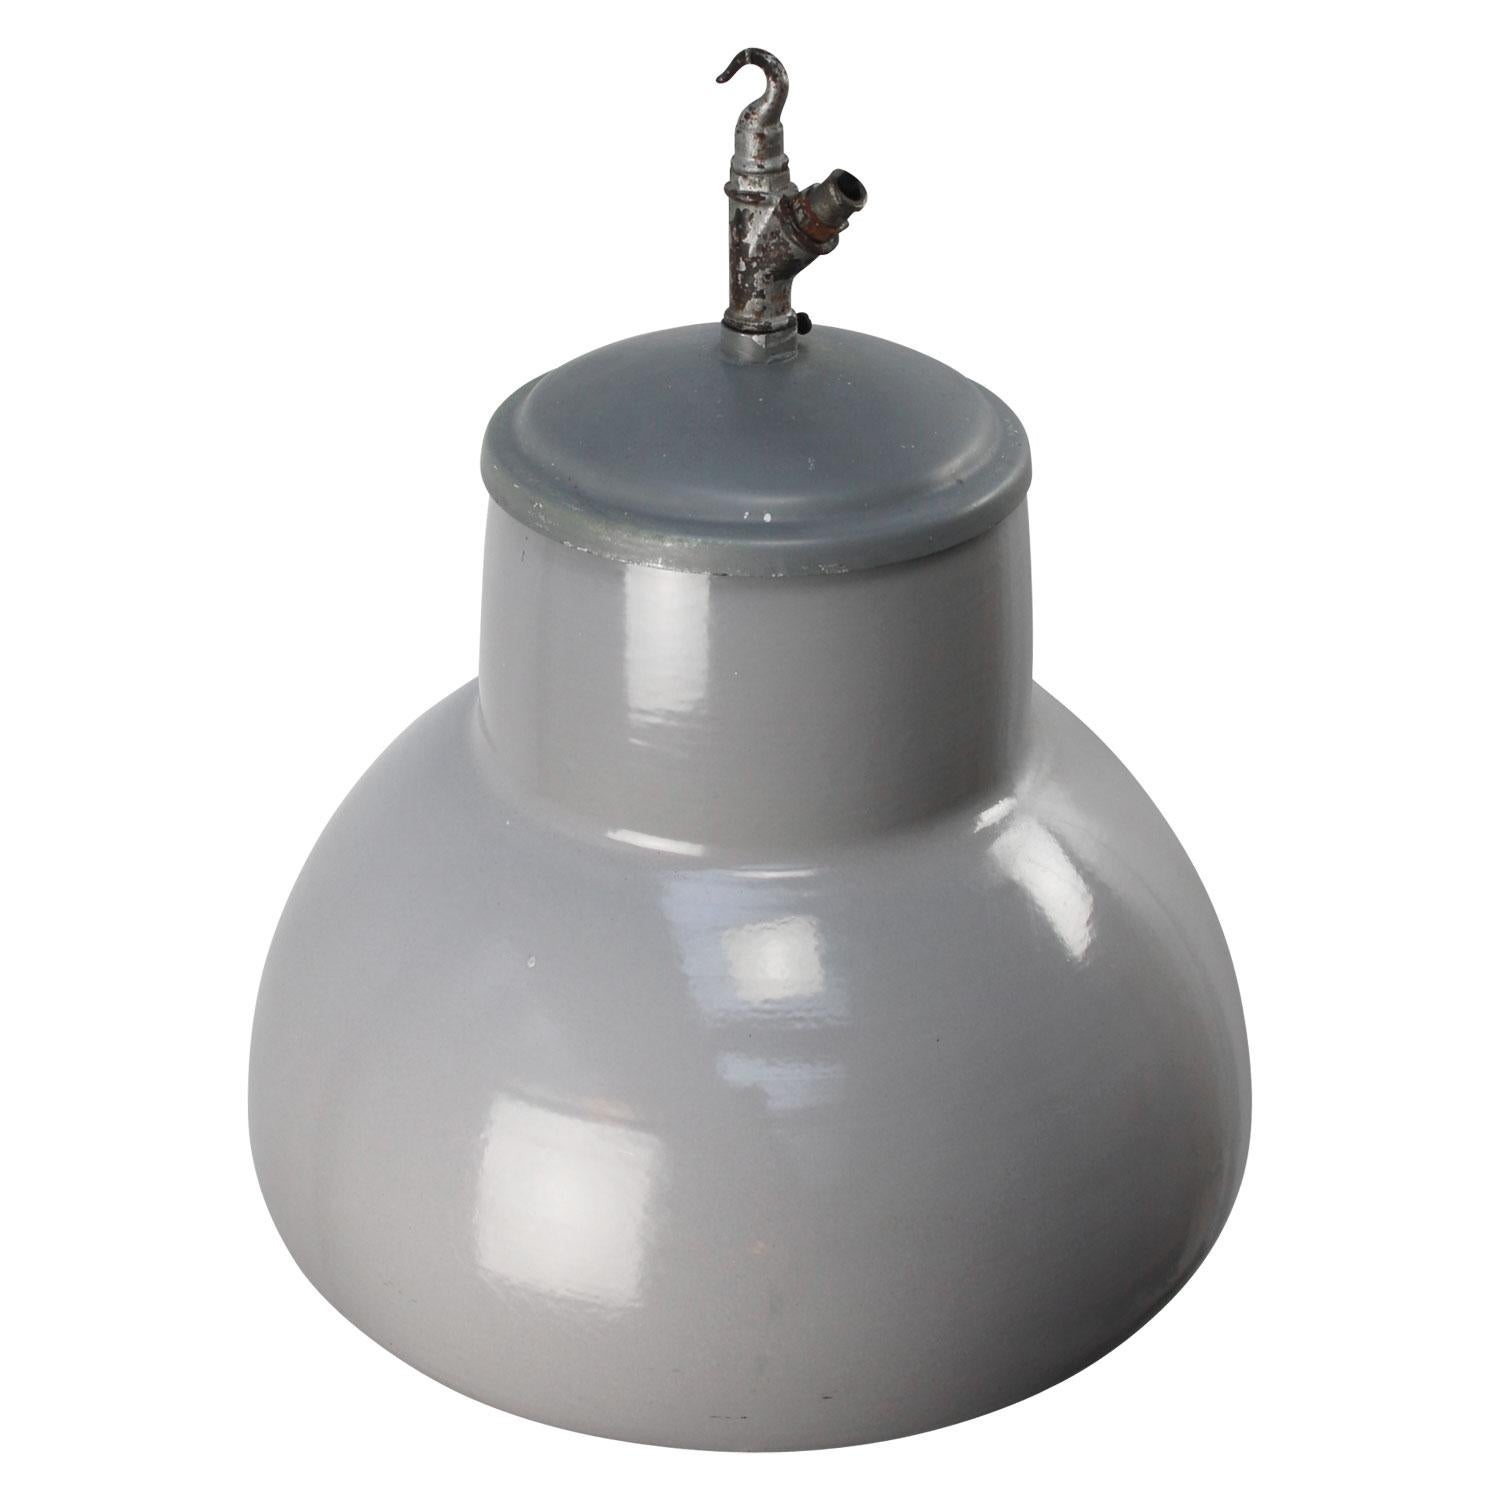 Dutch grey industrial factory light by Philips
Thick quality enamel. Metal top.
Used in warehouses and factories.

Double bulb holder: 2x E27/E26

Weight: 7.10 kg / 15.7 lb

Priced per individual item. All lamps have been made suitable by